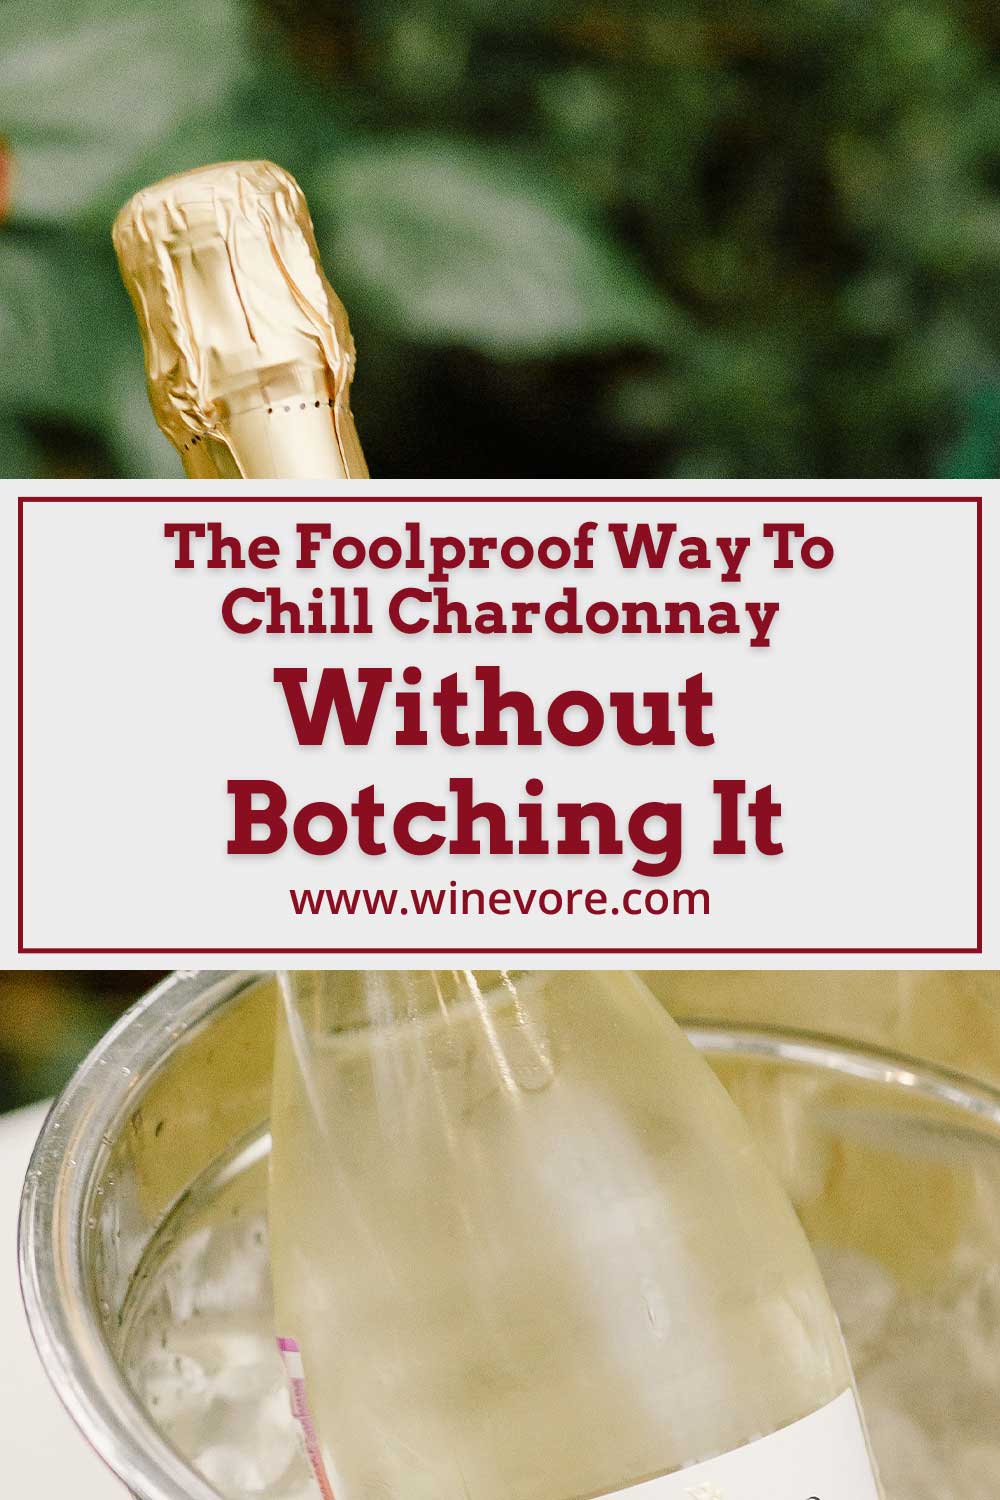 A bottle of Chardonnay in a bucket - The Foolproof Way To Chill it Without Botching